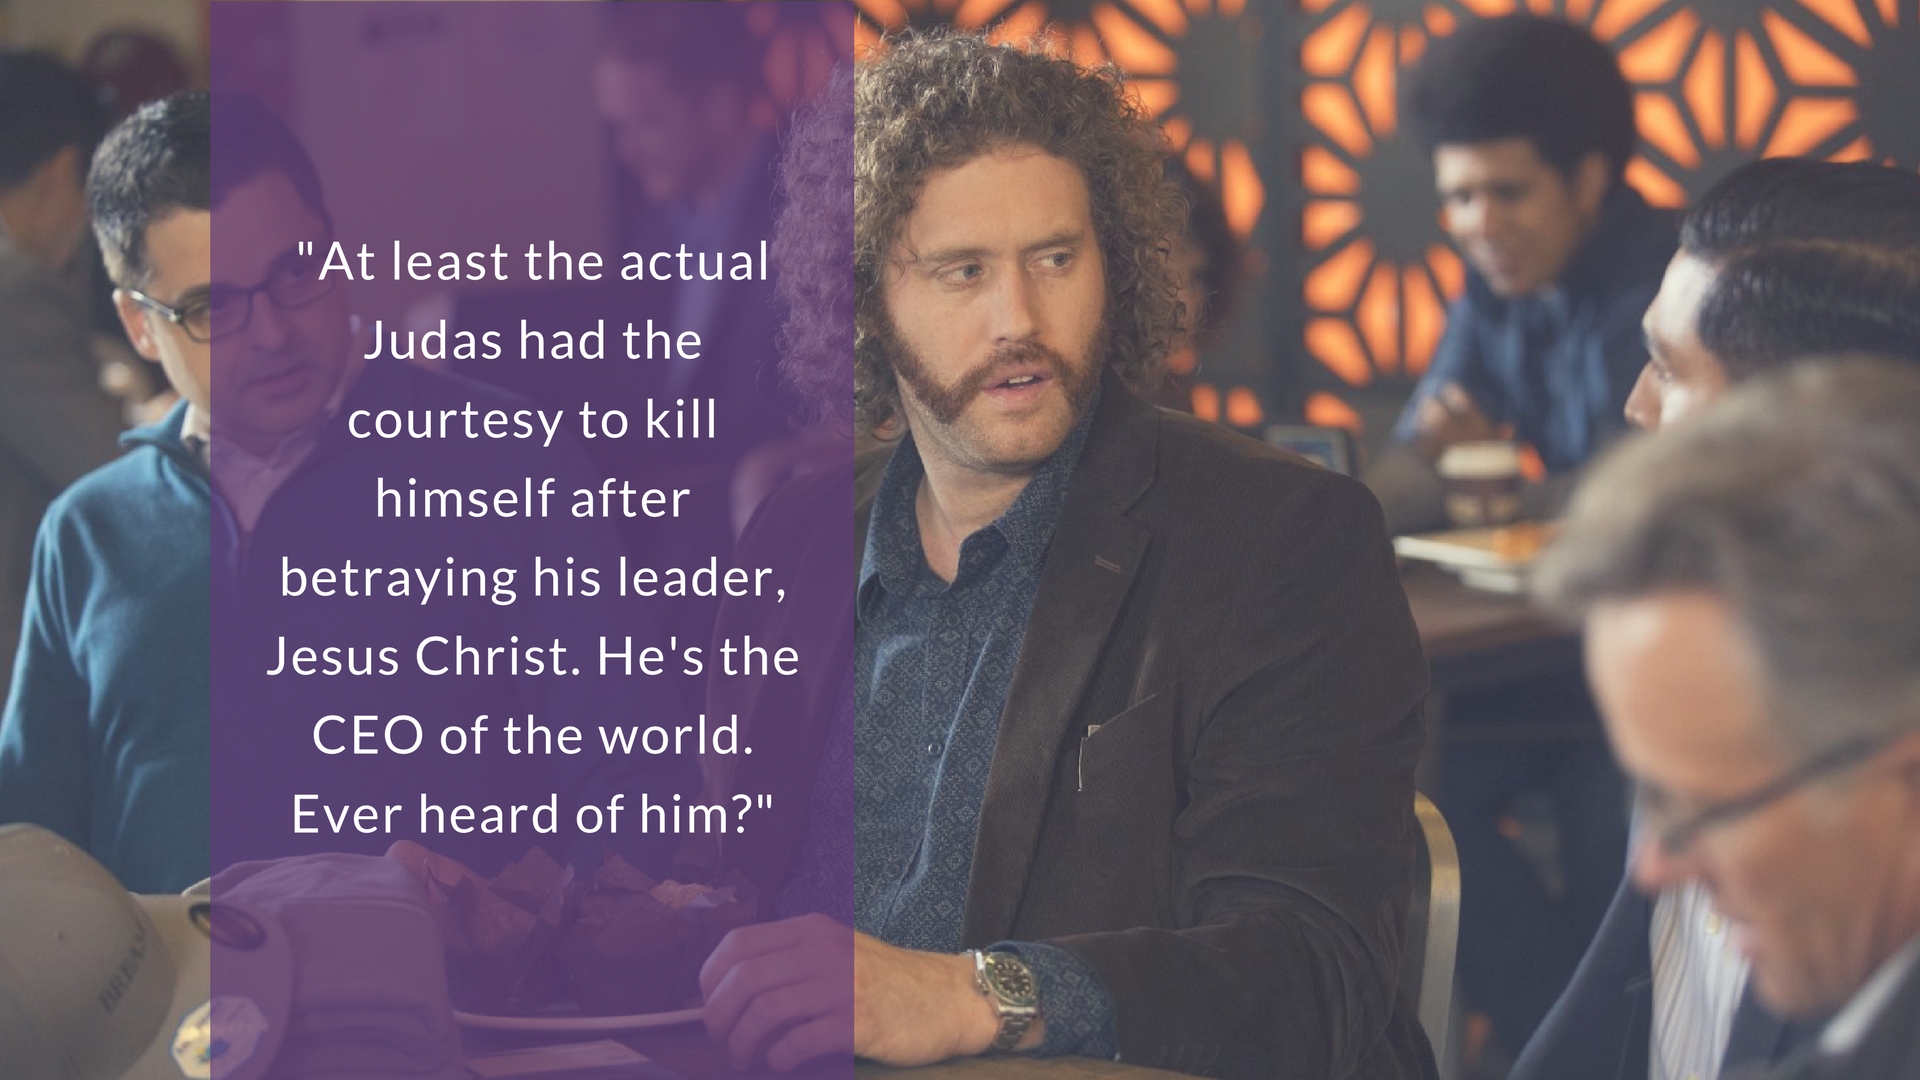 Erlich Bachman’s Funniest Quotes - The Stremio Blog